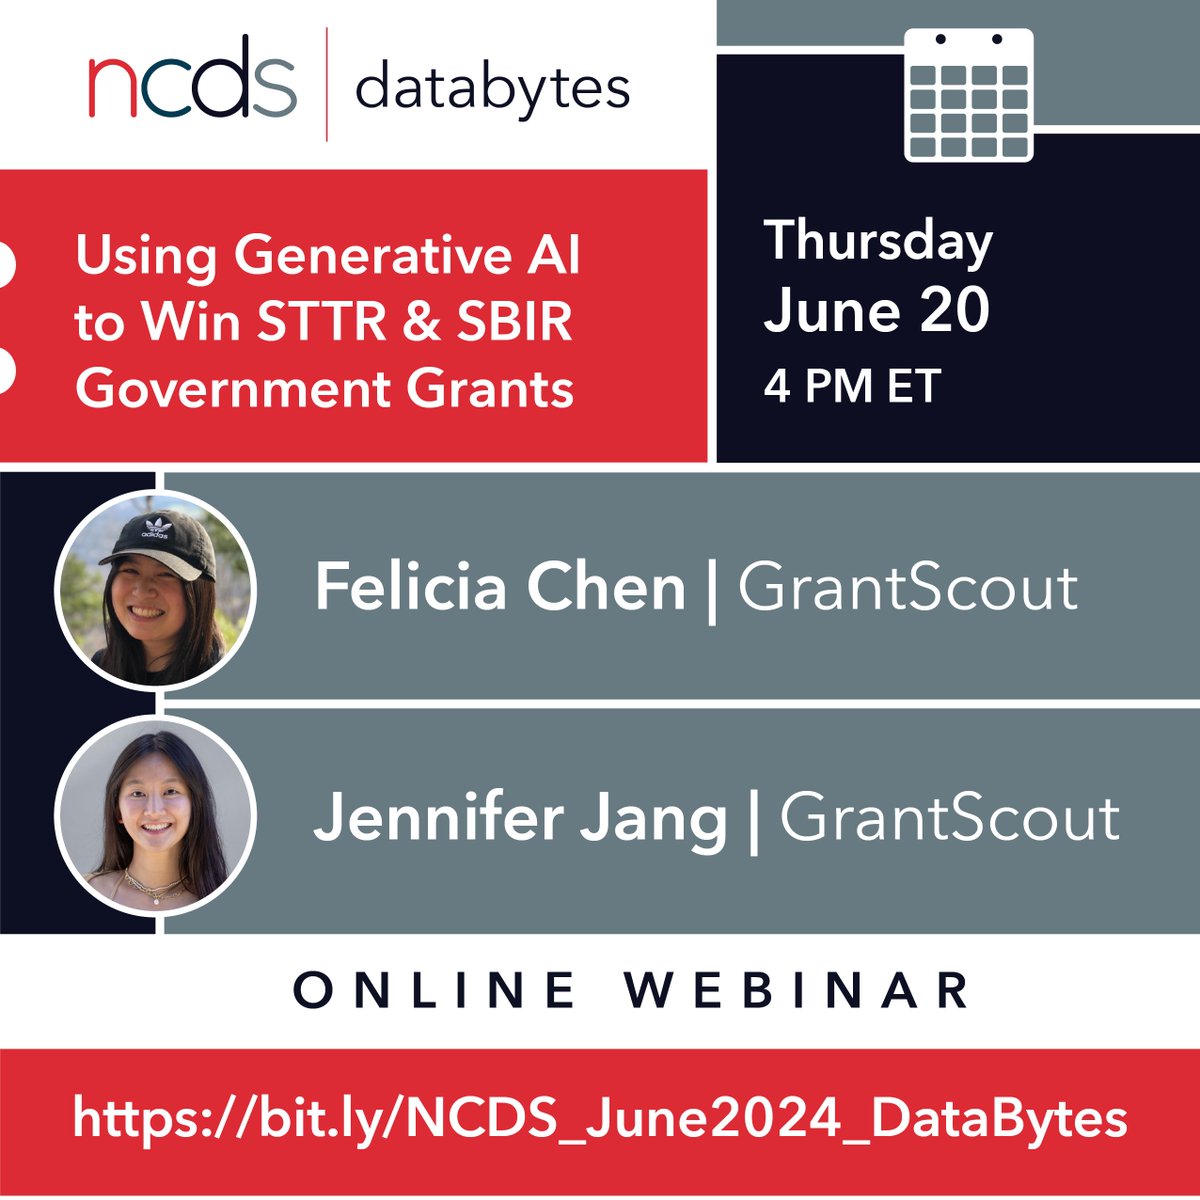 #DataBytes, a free #webinar series designed to showcase diverse + innovative topics in #datascience, will return in June. Join the @GrantScoutAI executive team for 'Using #GenAI to win #STTR + #SBIR #GovernmentGrants' on June 20 at 4 PM ET. #AI #bigdata

datascienceconsortium.org/event/databyte…